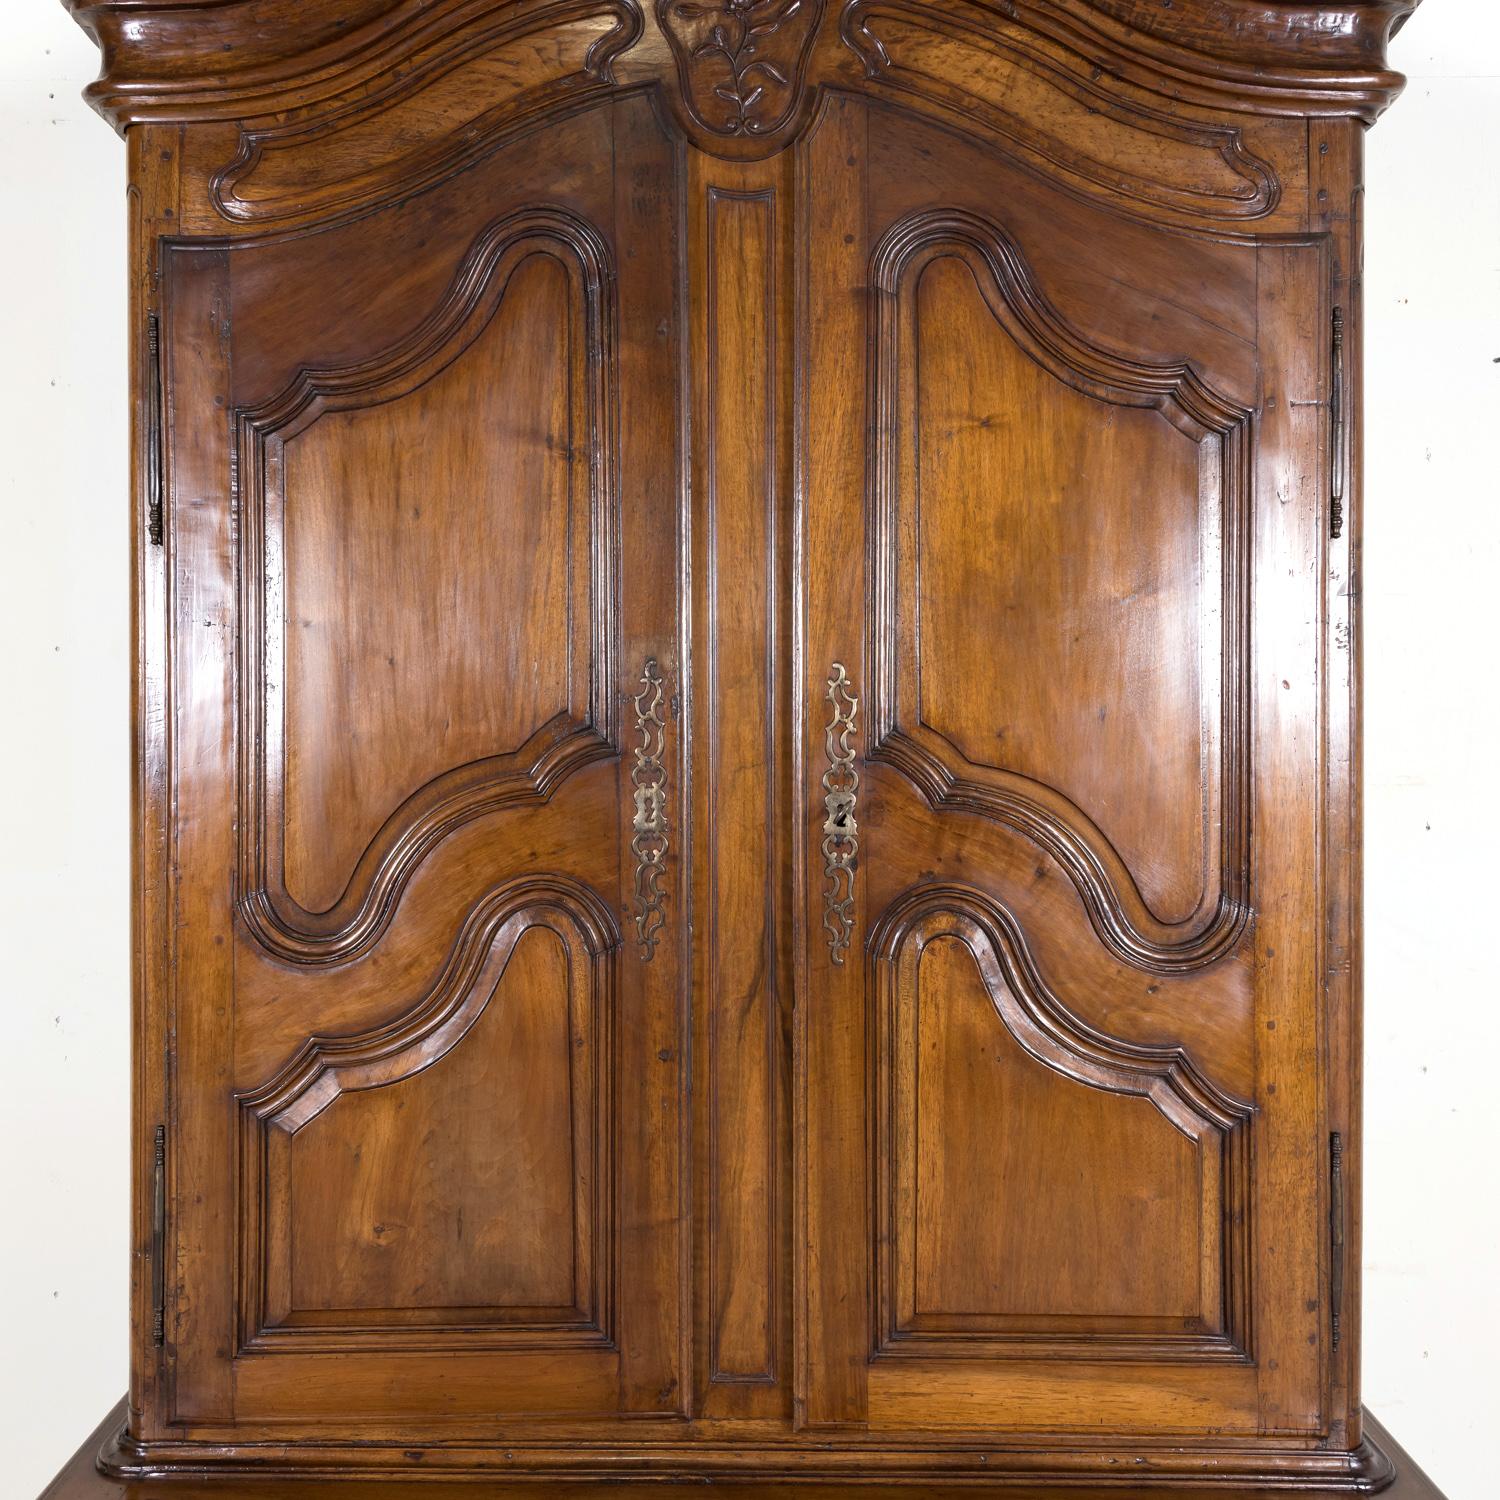 Rare 18th Century French Louis XV Period Walnut Armoire Pantalonnier Deux Corps For Sale 2